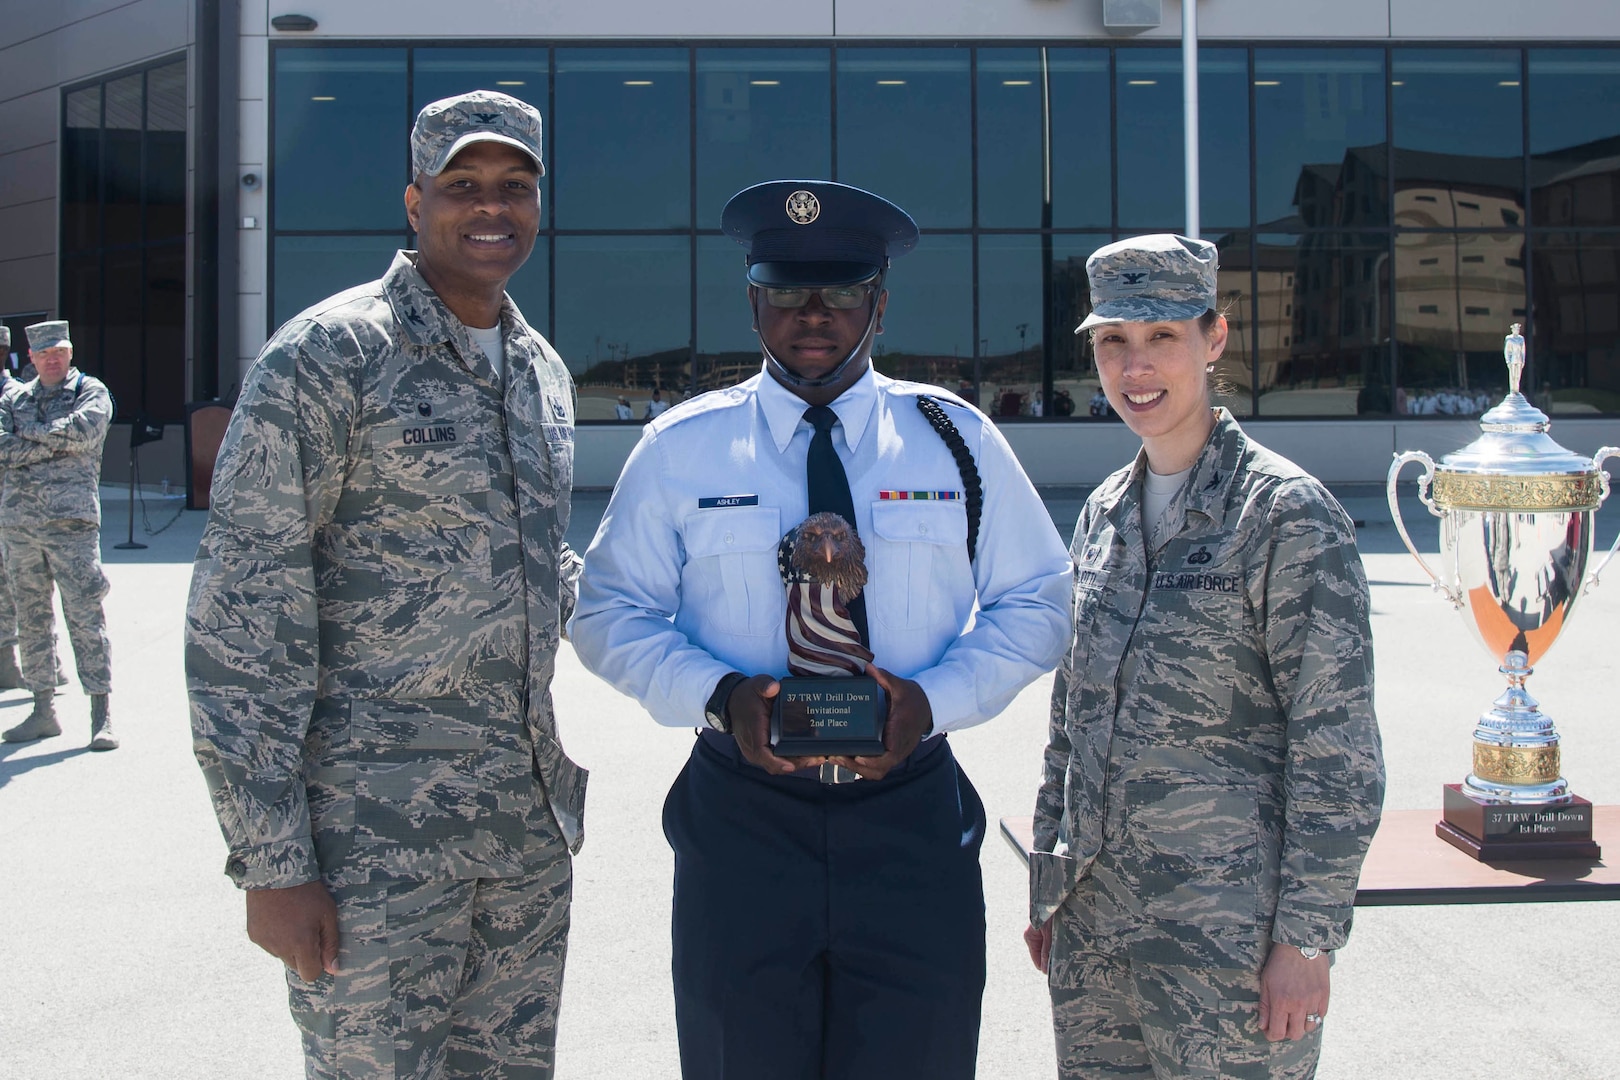 The trophy for second place in the 37th Training Wing Drill Down invitational is awarded to a representative from the 17th Training Wing drill team, by Col. Roy W. Collins, 37th TRW commander, and Col. Bridget Gigliotti, 37th Training Group commander, at the Pfingston Reception Center at Joint Base San Antonio-Lackland, Texas, Feb. 25, 2017. The 17th TRW team traveled from Goodfellow Air Force Base, Texas, to participate in the competition for the first time. 